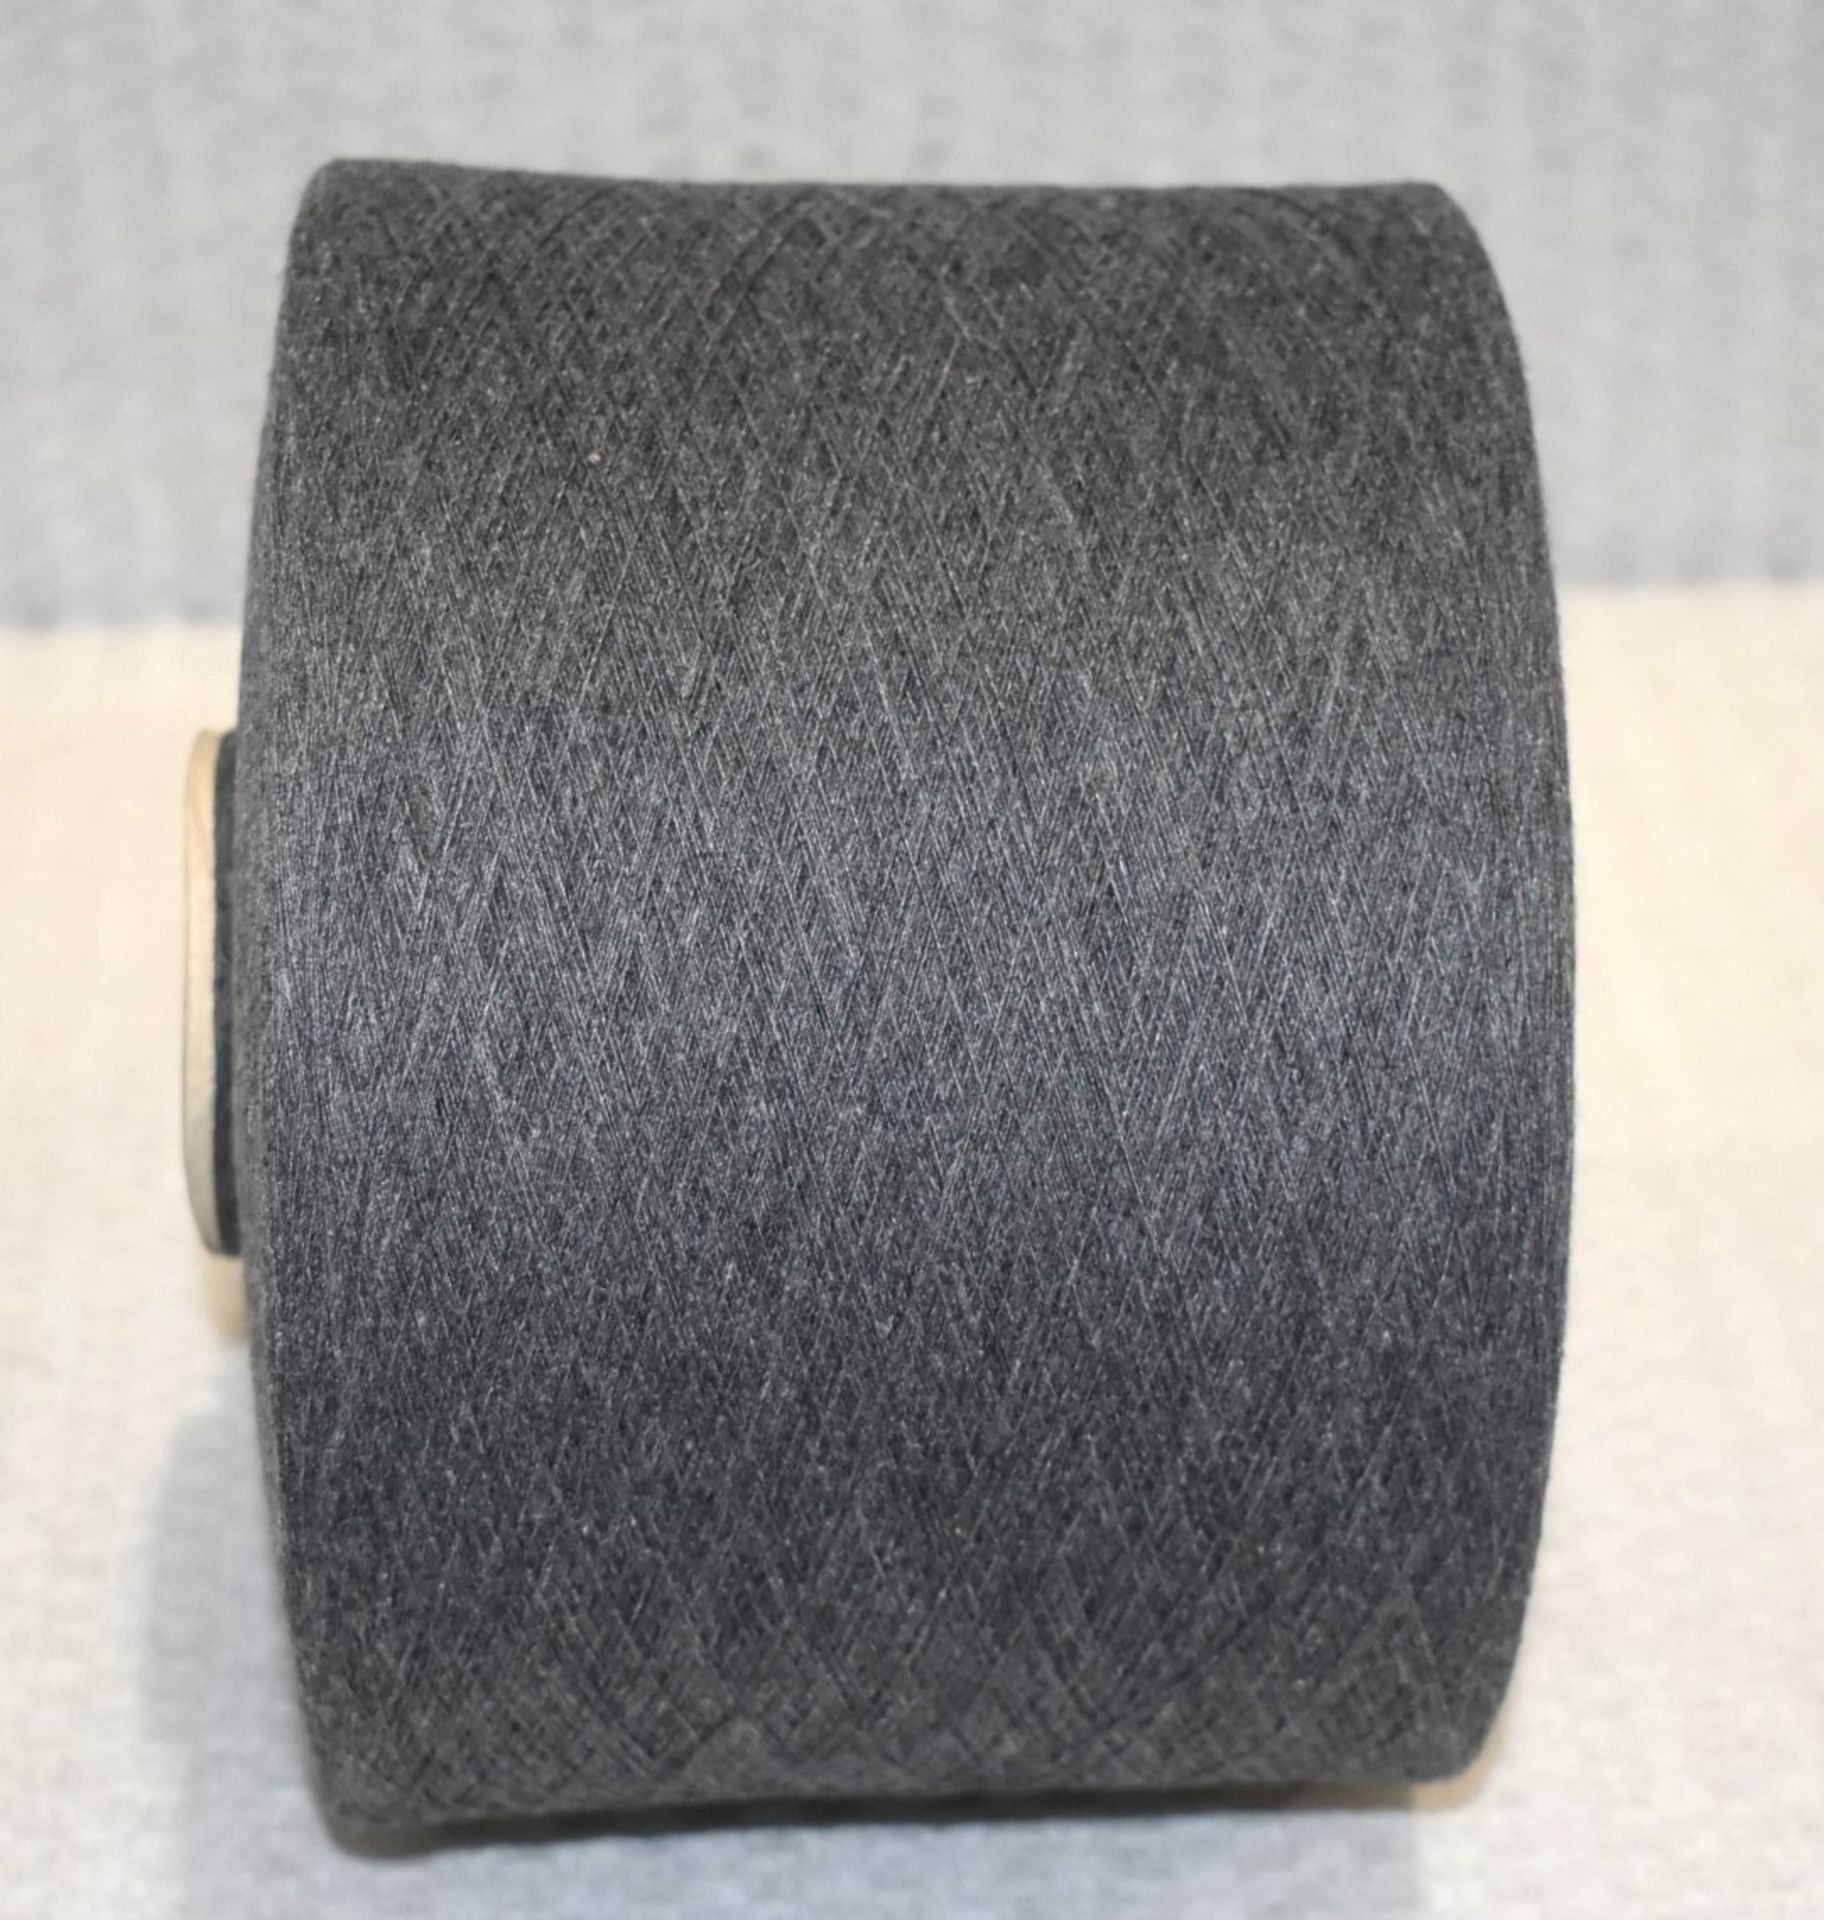 10 x Cones of 1/13 MicroCotton Knitting Yarn - Mid Grey - Approx Weight: 2,500g - New Stock ABL Yarn - Image 9 of 10